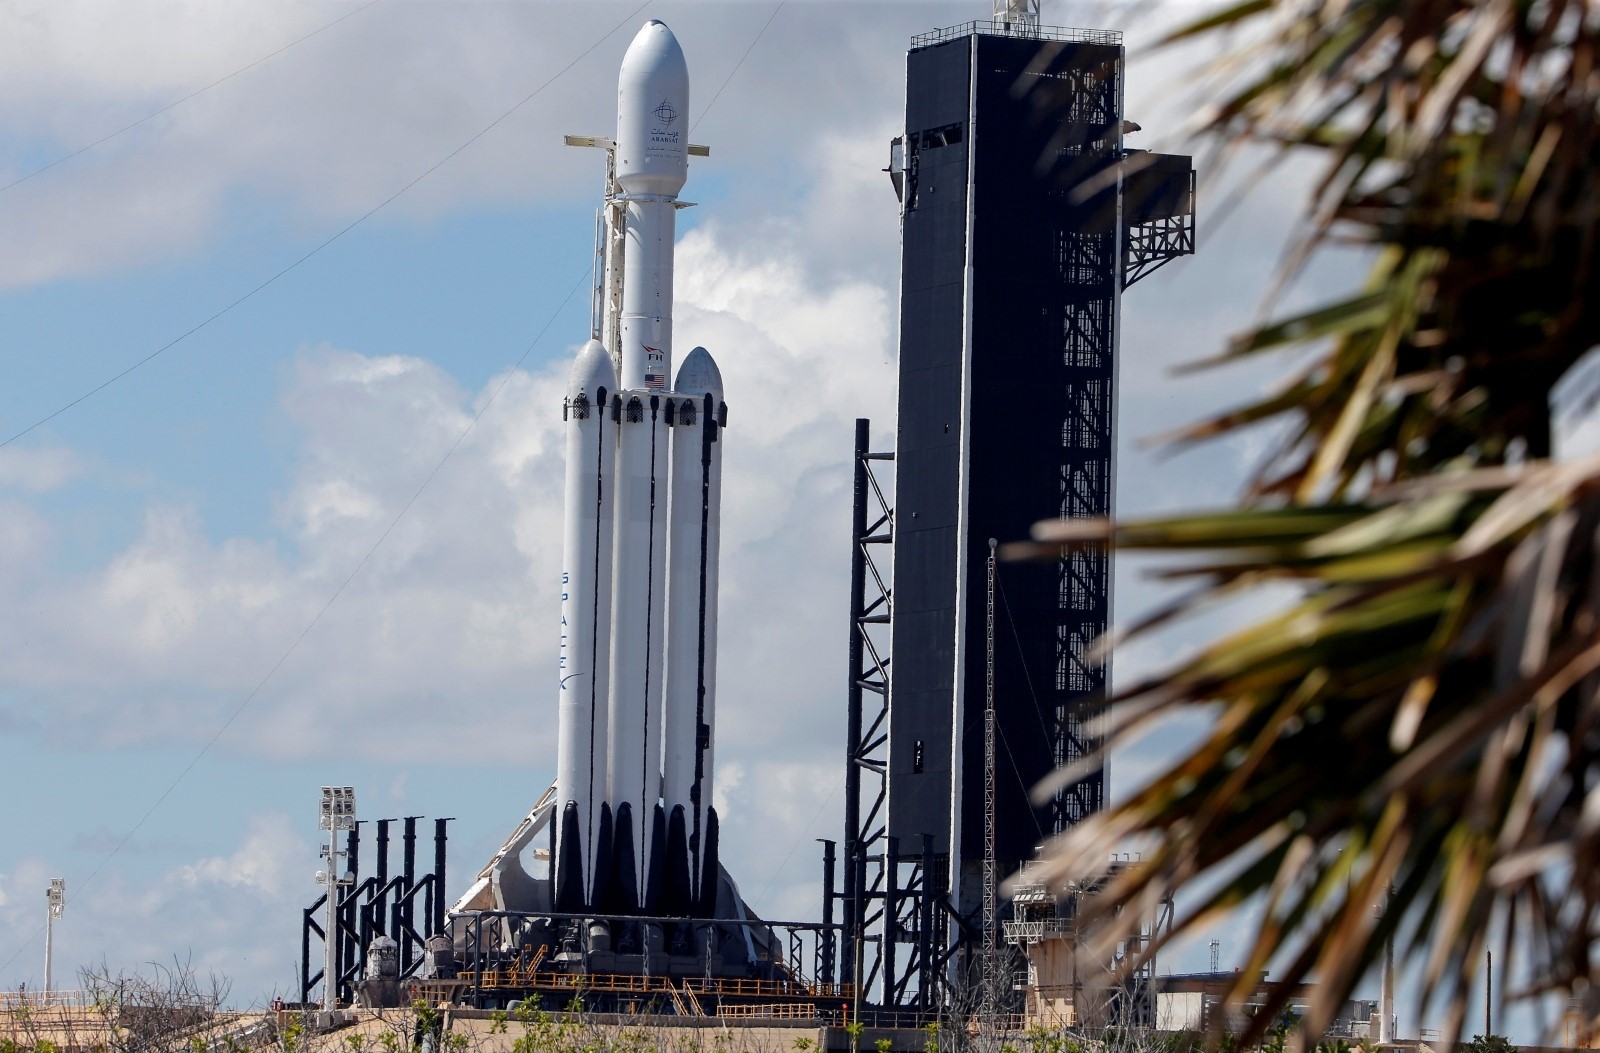 FILE PHOTO: A SpaceX Falcon Heavy rocket with the Arabsat 6A communications satellite aboard is prepared for launch at the Kennedy Space Center in Cape Canaveral FILE PHOTO: A SpaceX Falcon Heavy rocket with the Arabsat 6A communications satellite aboard is shown before another launch attempt at the Kennedy Space Center in Cape Canaveral, Florida, U.S., April 11, 2019.  REUTERS/Joe Skipper/File Photo Joe Skipper